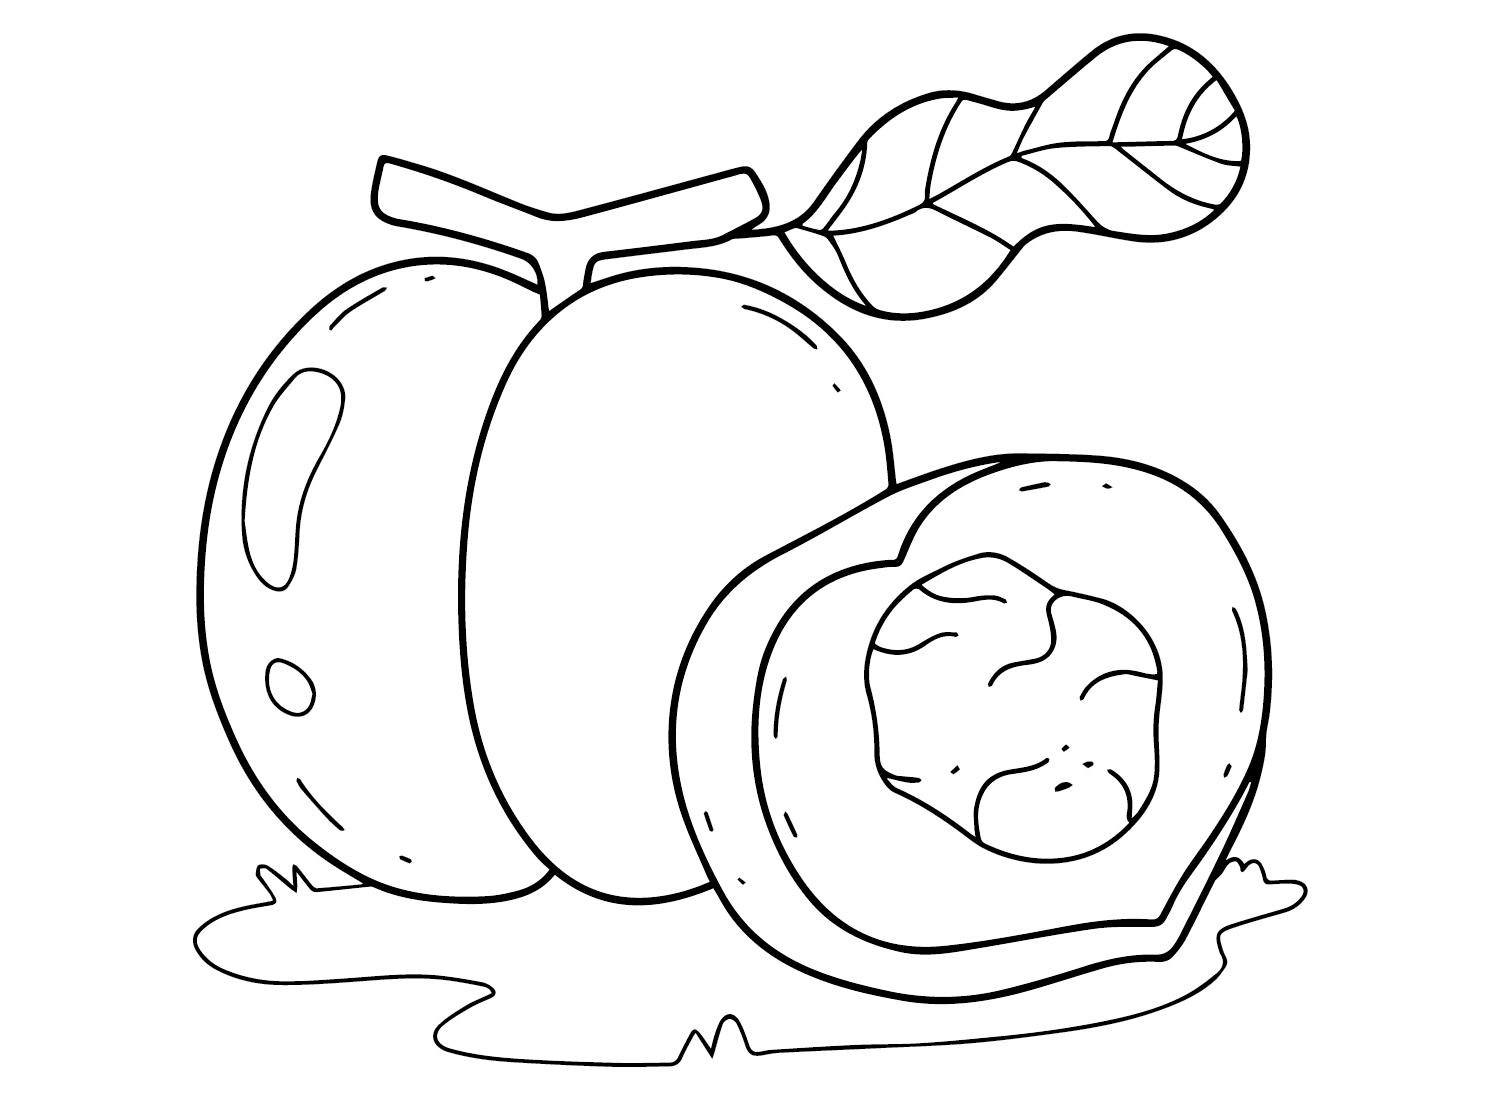 Peach Nectarine Coloring Page